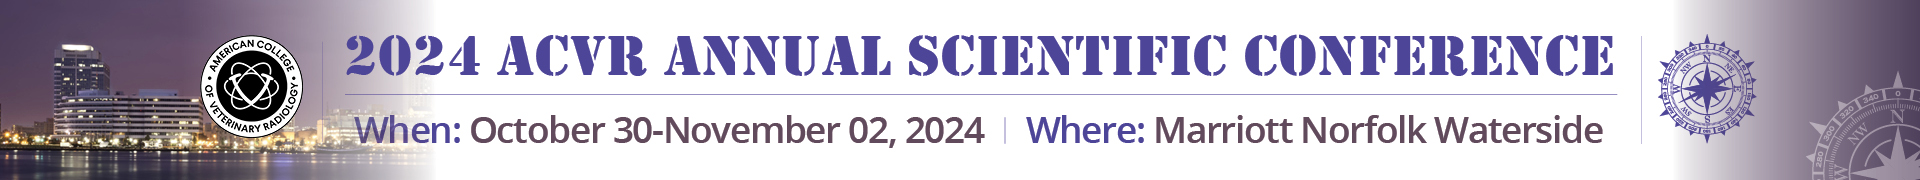 2024 ACVR Annual Scientific Conference Event Banner